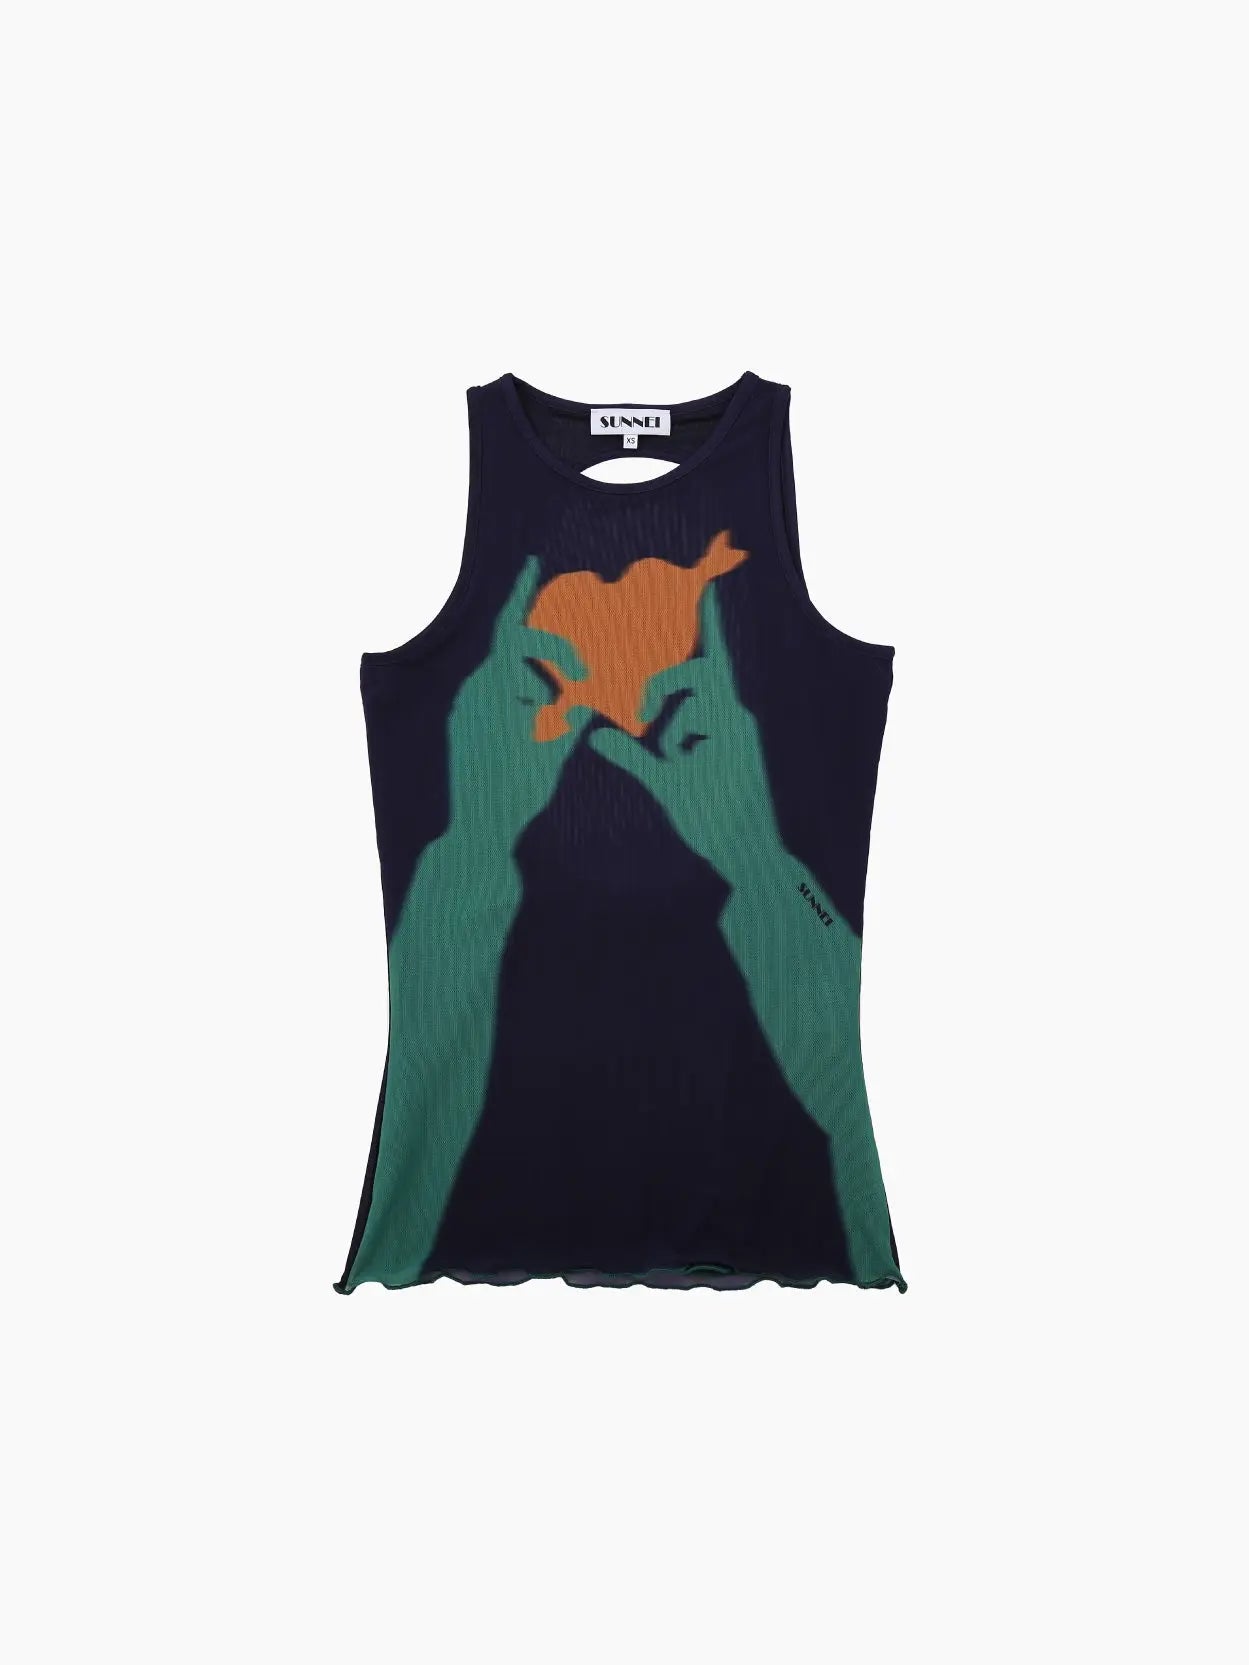 A dark, sleeveless Buco Tulle Top Dark Blue featuring a graphic design of two green hands holding an orange fish. The brand label "Sunnei" is visible at the inside back of the neck. Available exclusively at Bassalstore in Barcelona, the bottom hem is slightly wavy, adding texture to the design.